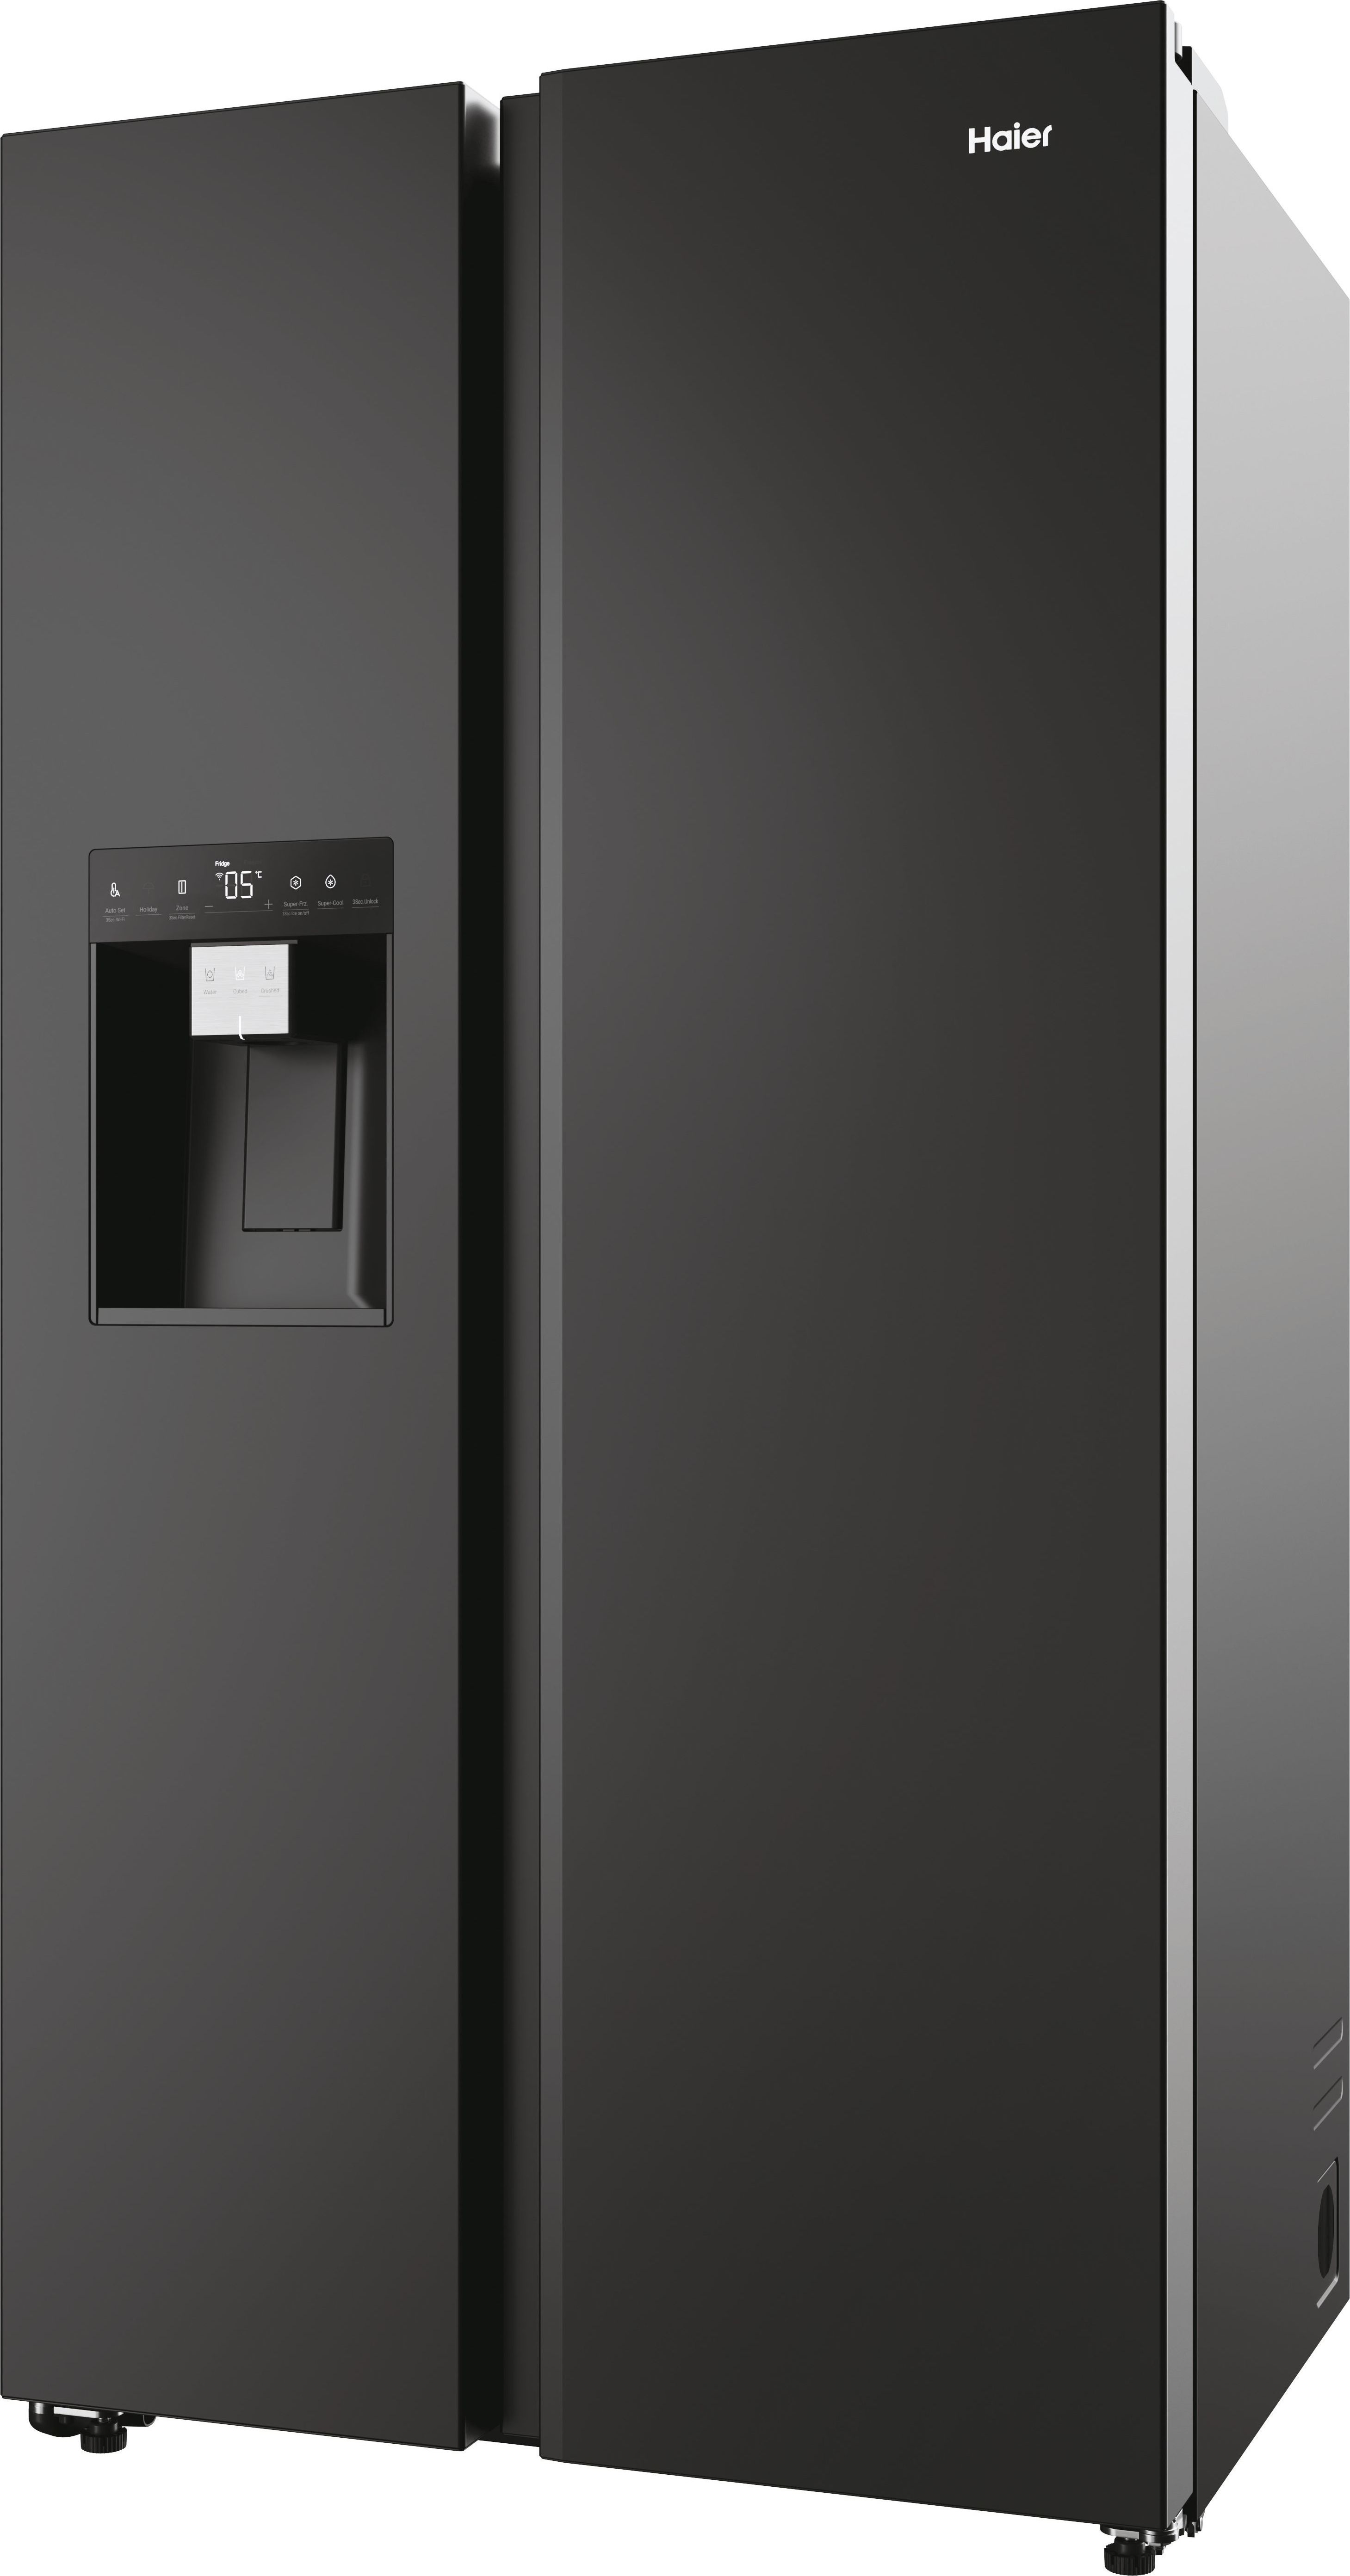 Haier HSW79F18DIPT Wifi Connected Plumbed Frost Free American Fridge Freezer - Black - D Rated, Black